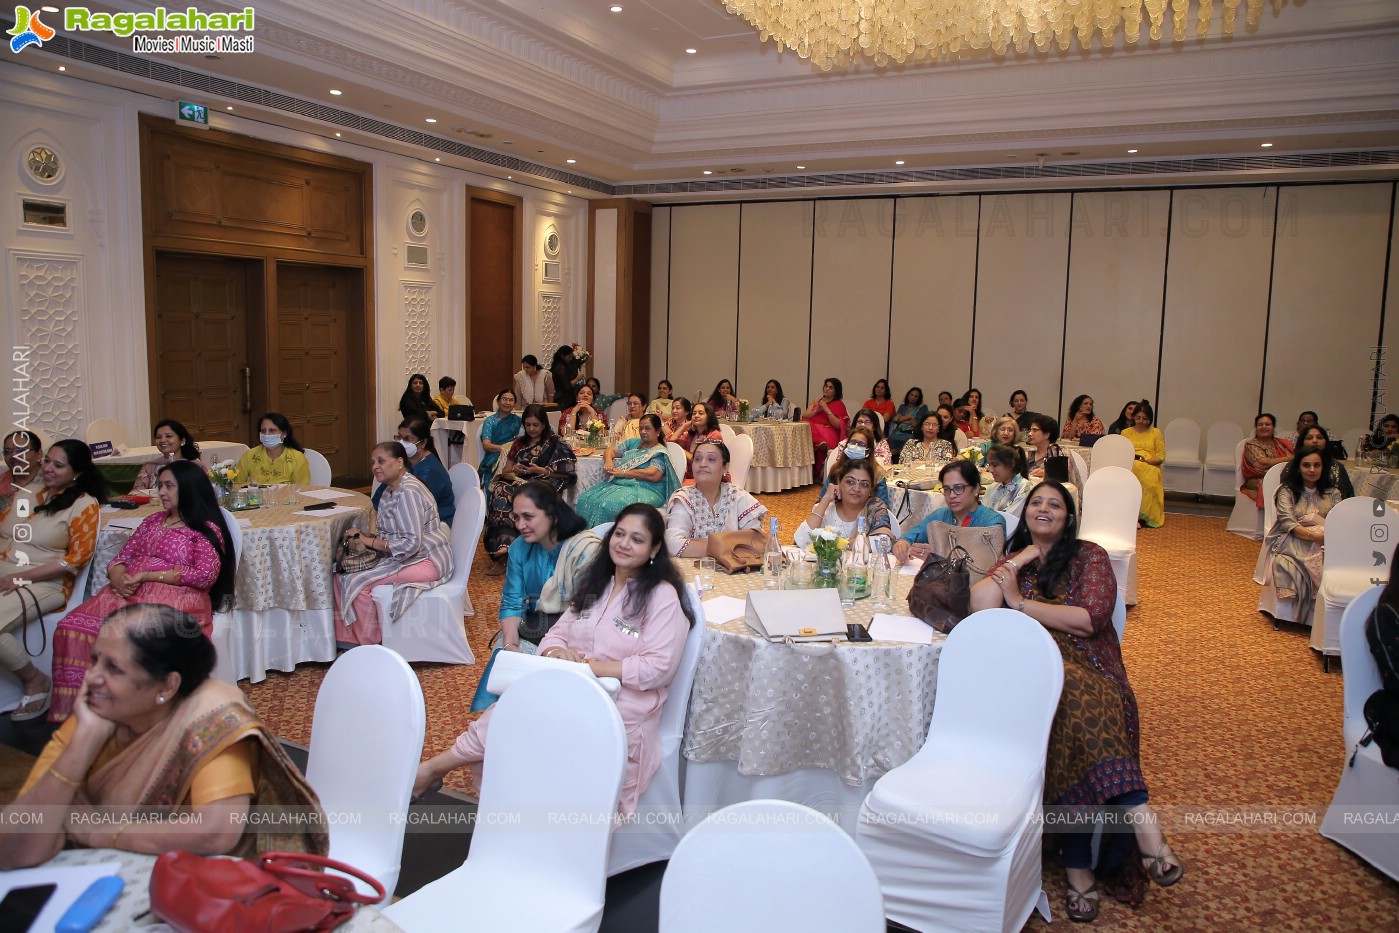 Sanskruti Women's Club Hosts a Session on Holistic Healing for Health and Self Care